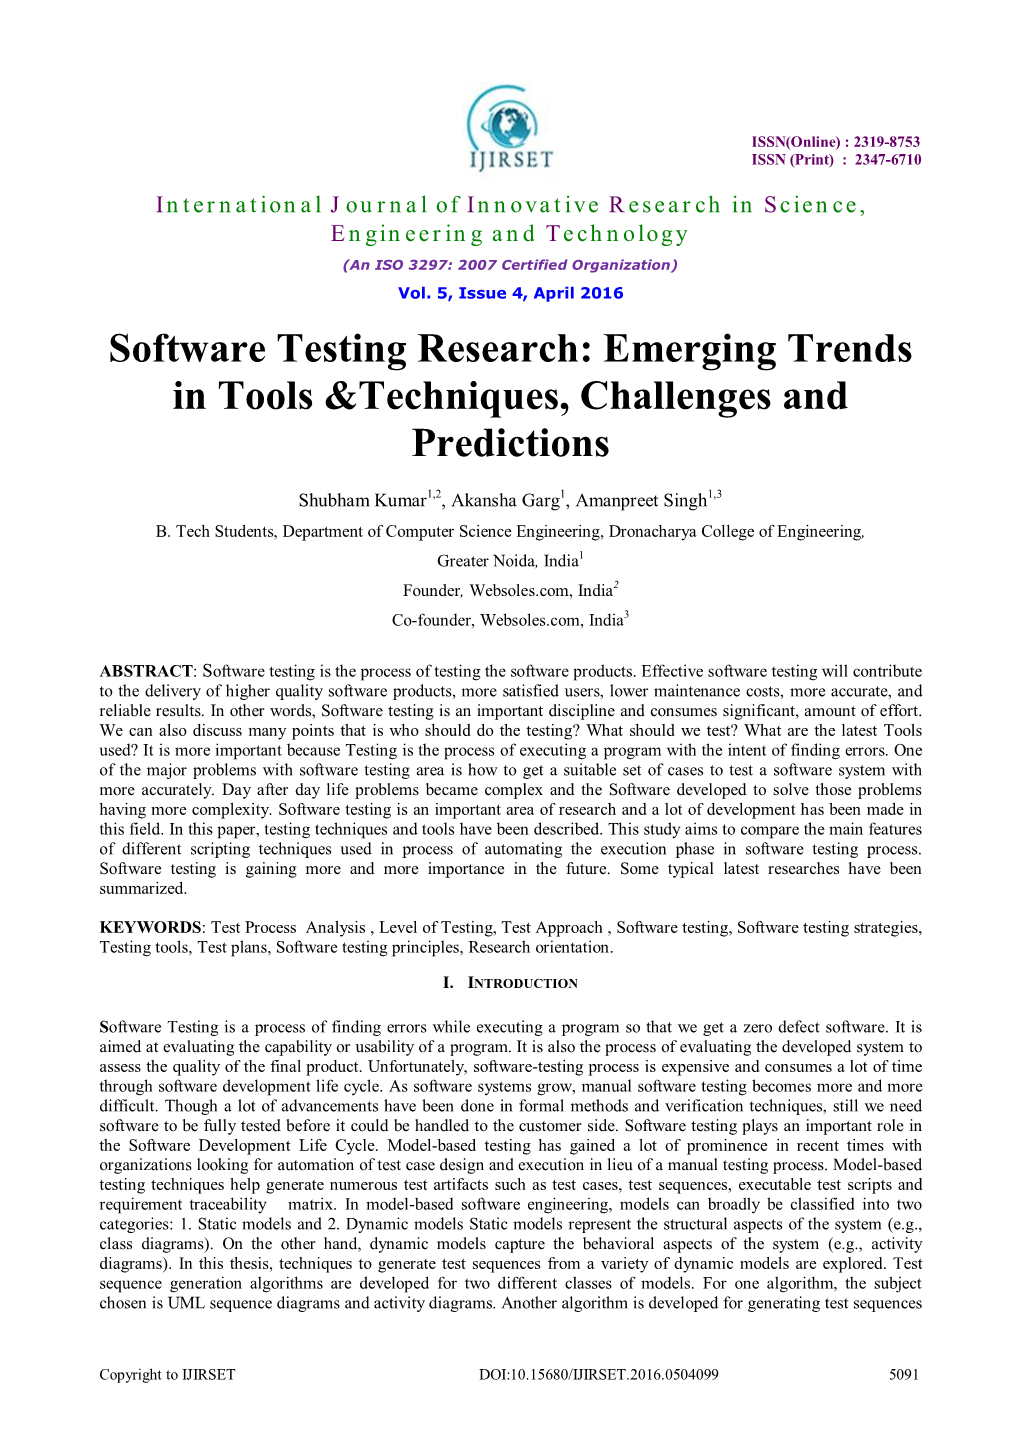 Software Testing Research: Emerging Trends in Tools &Techniques, Challenges and Predictions